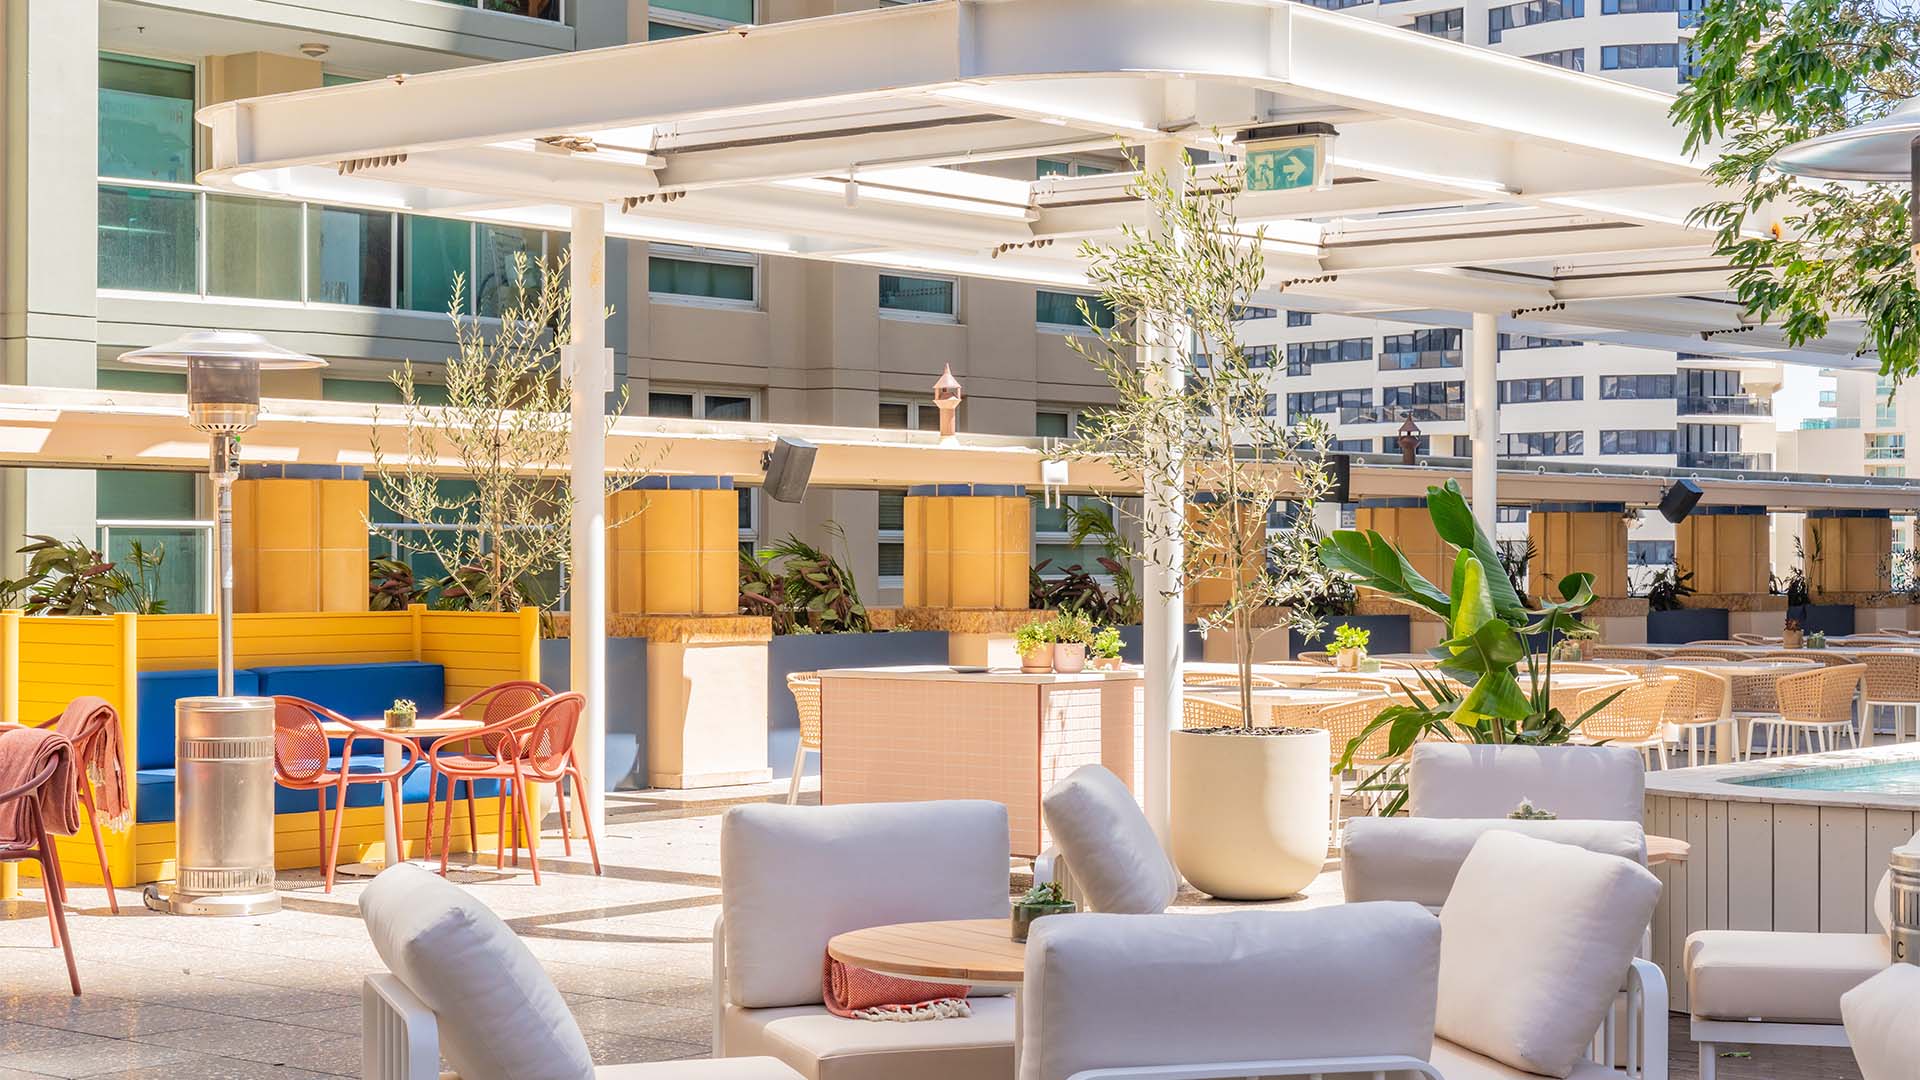 Luxe Sydney Hotel Kimpton Margot Is Launching Its Expansive Summer-Ready Rooftop Bar Harper This Week